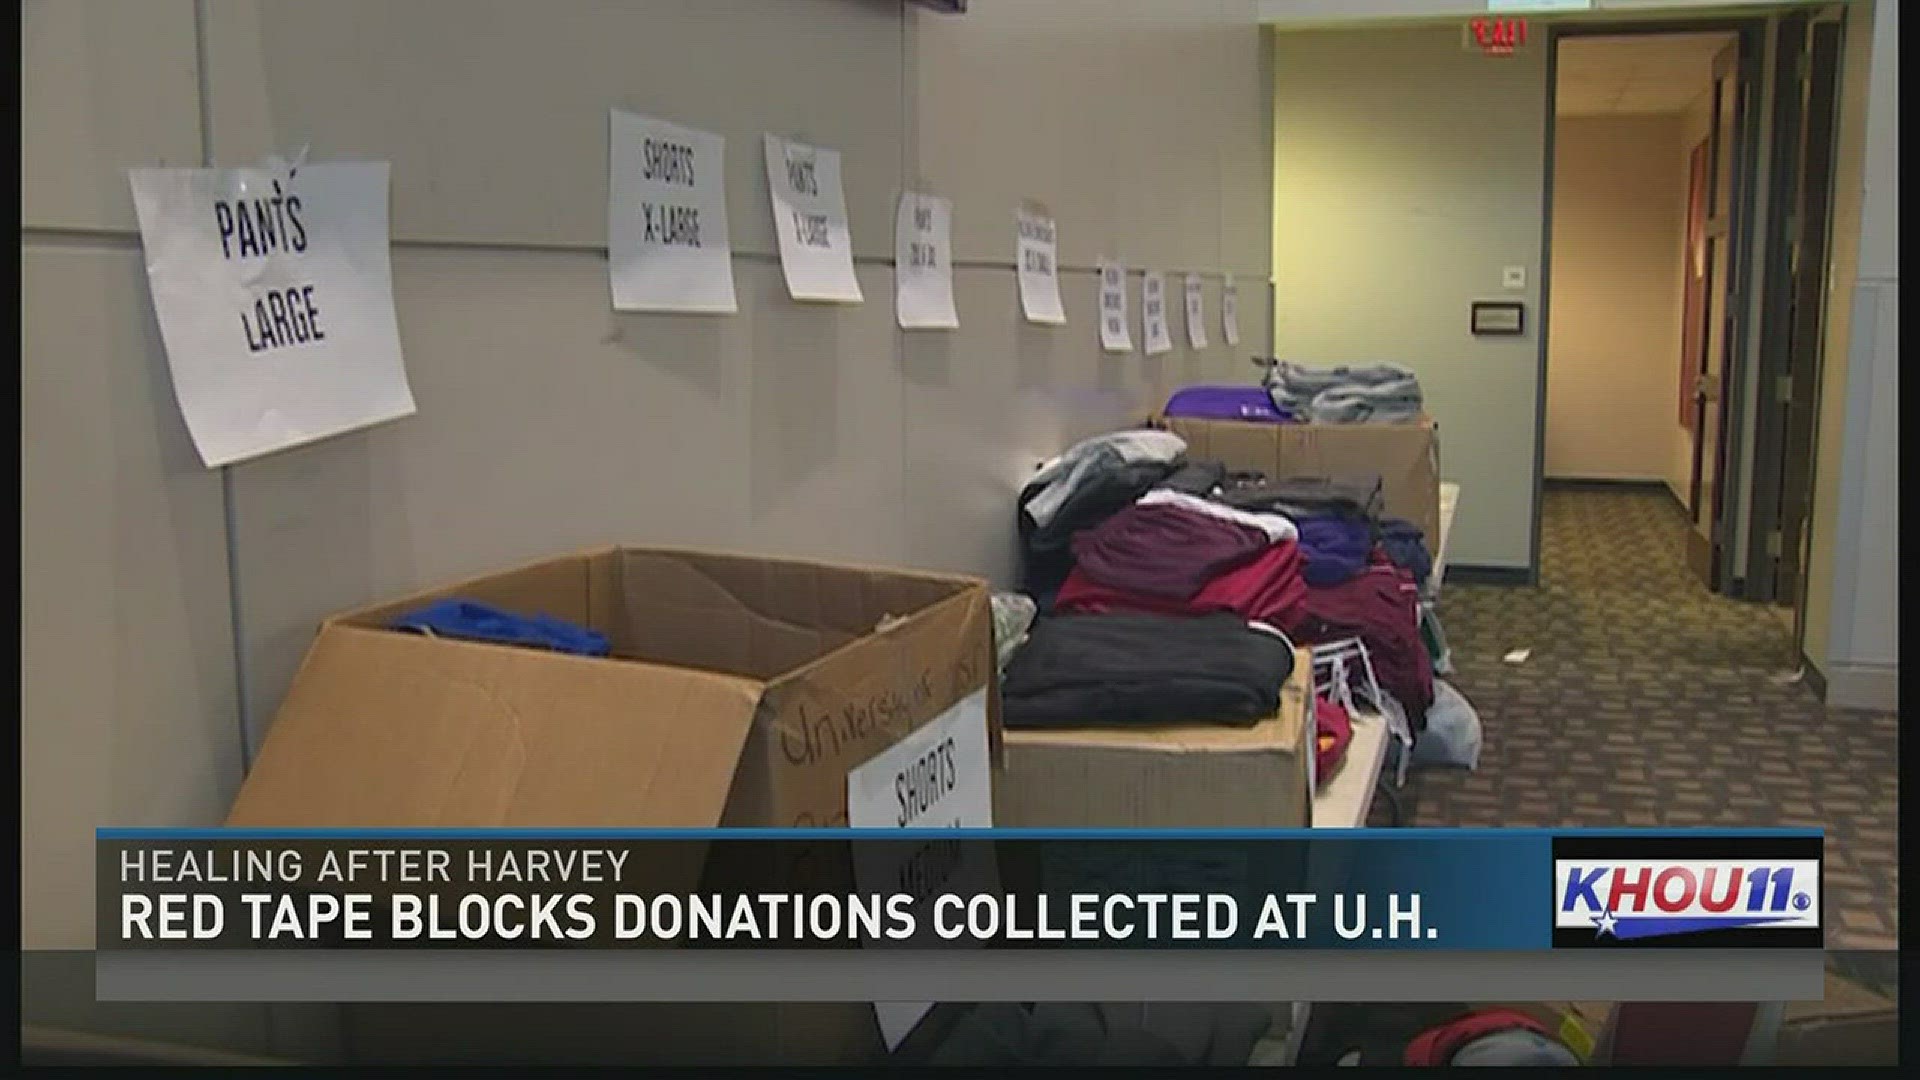 A University of Houston coach asked peers to send new shoes and shirts for Houston Harvey victims, and thousands donated. However, NCAA rules stand in the way.